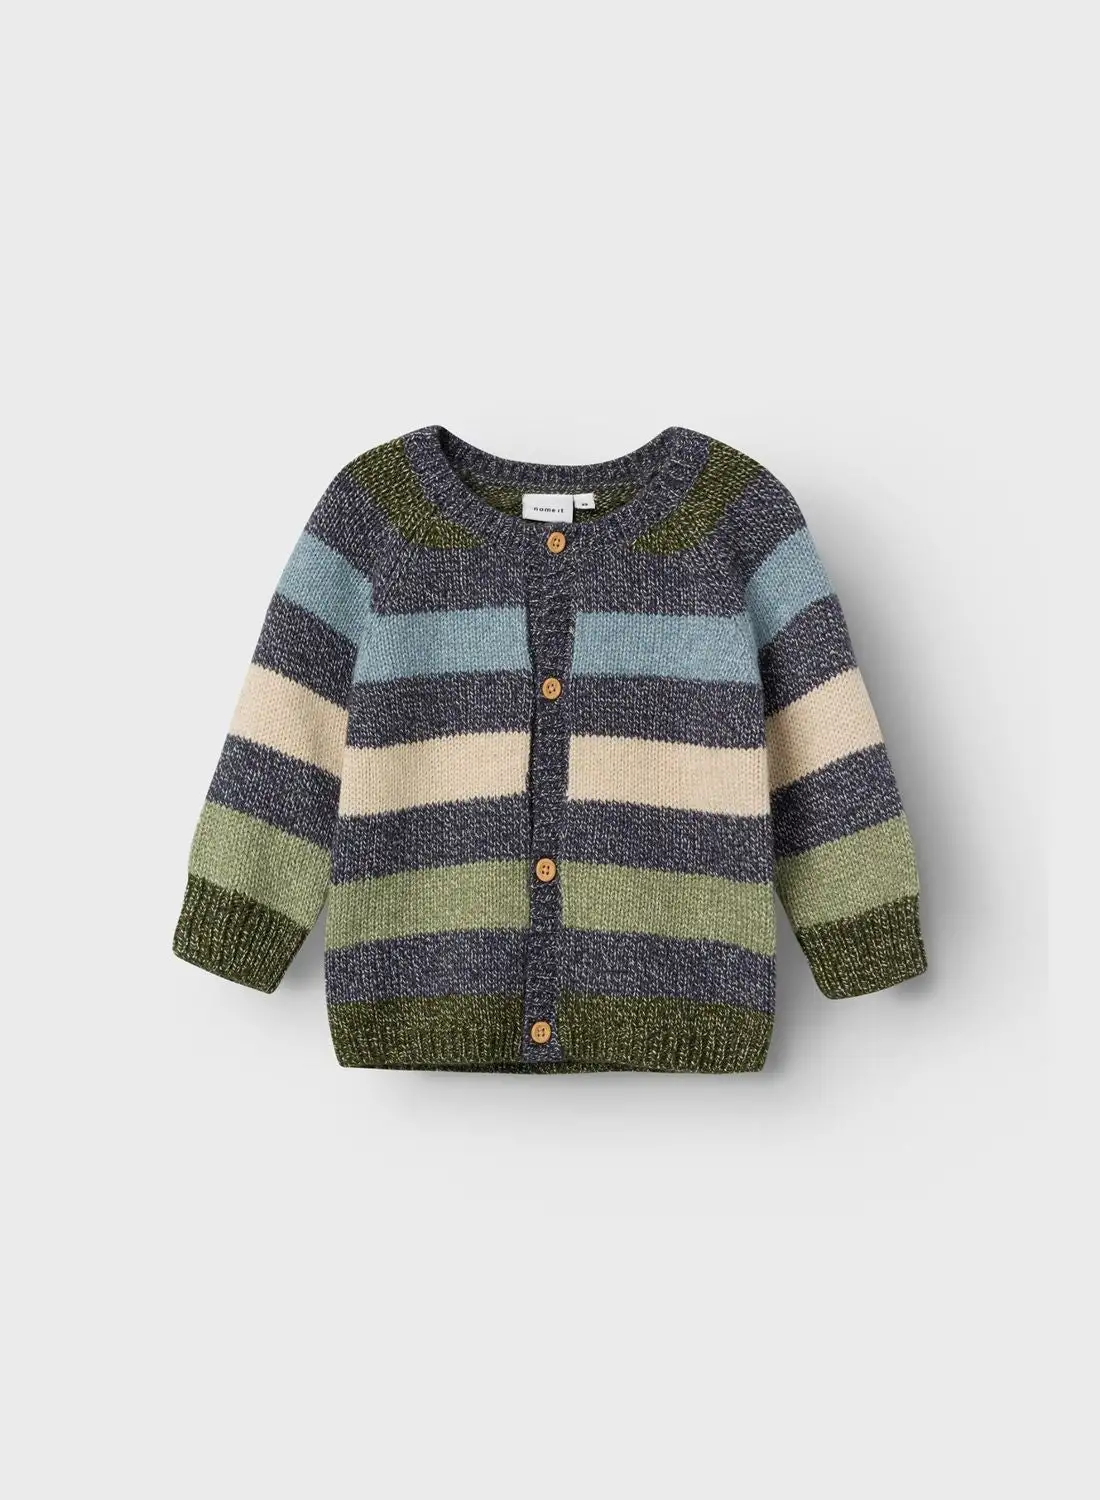 NAME IT Kids Striped Knitted Cardigan